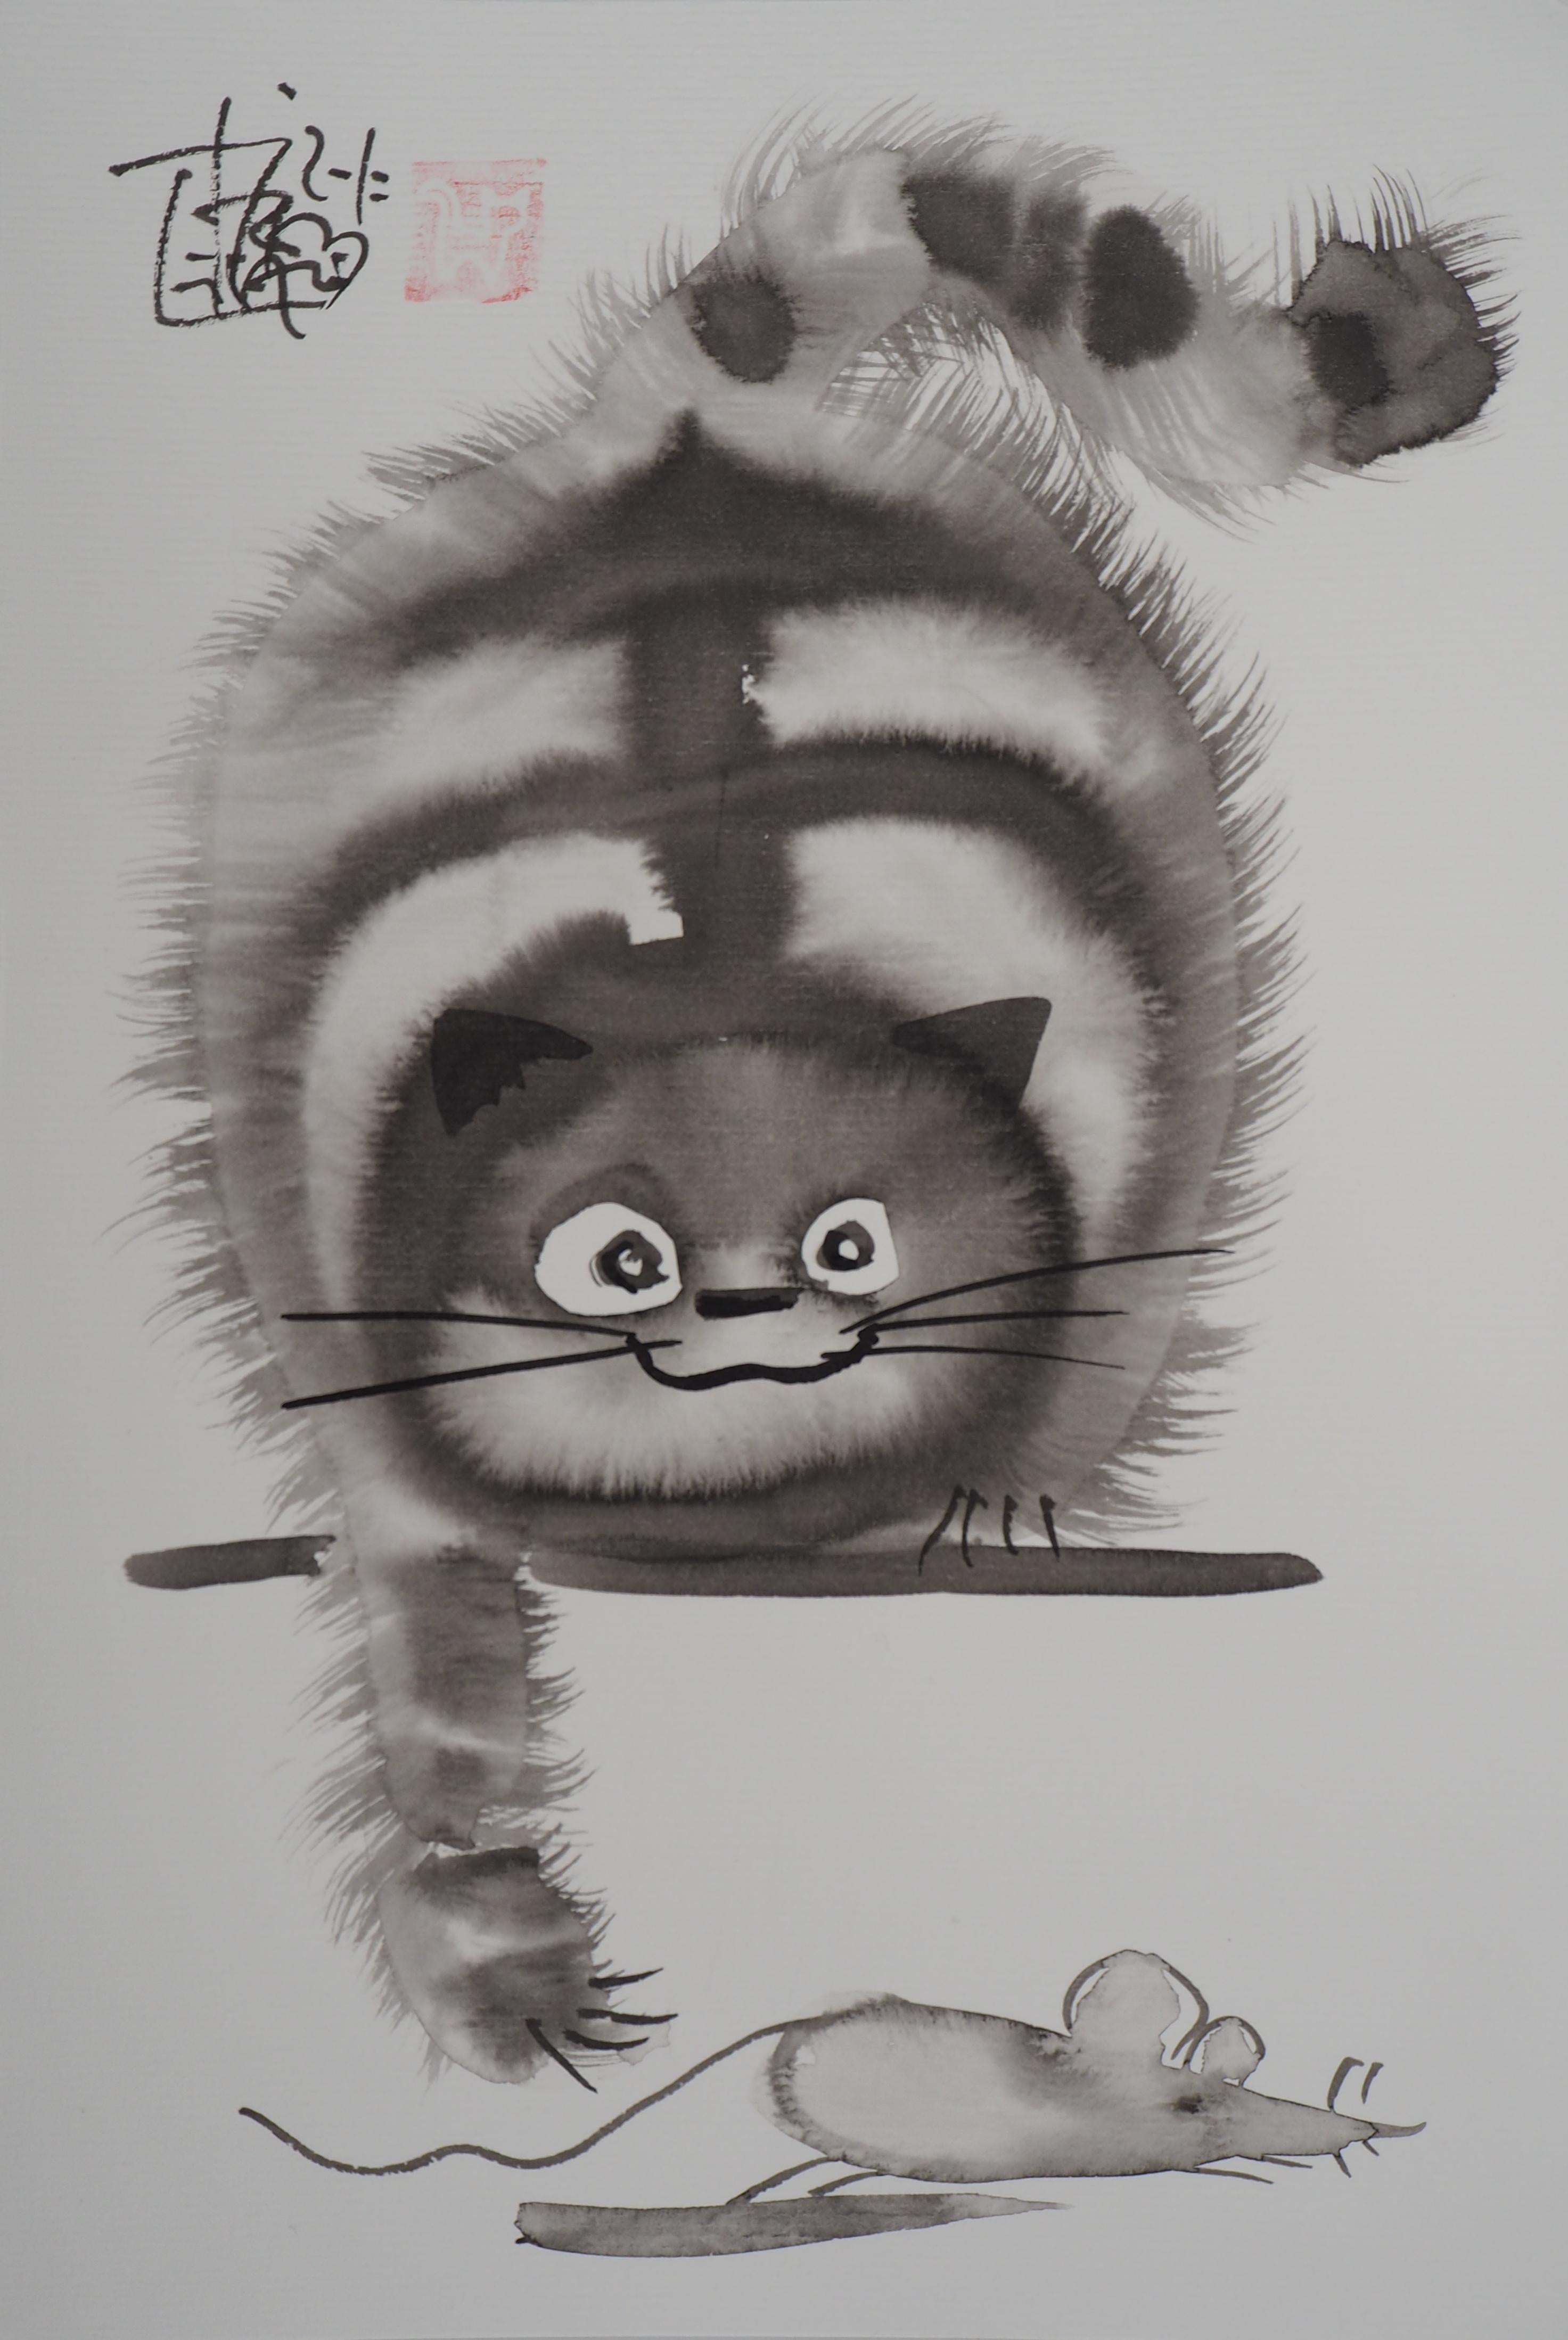 Laszlo Tibay Animal Art - Cat and Mouse : Catch me if you can - Handsigned Original Ink Drawing 